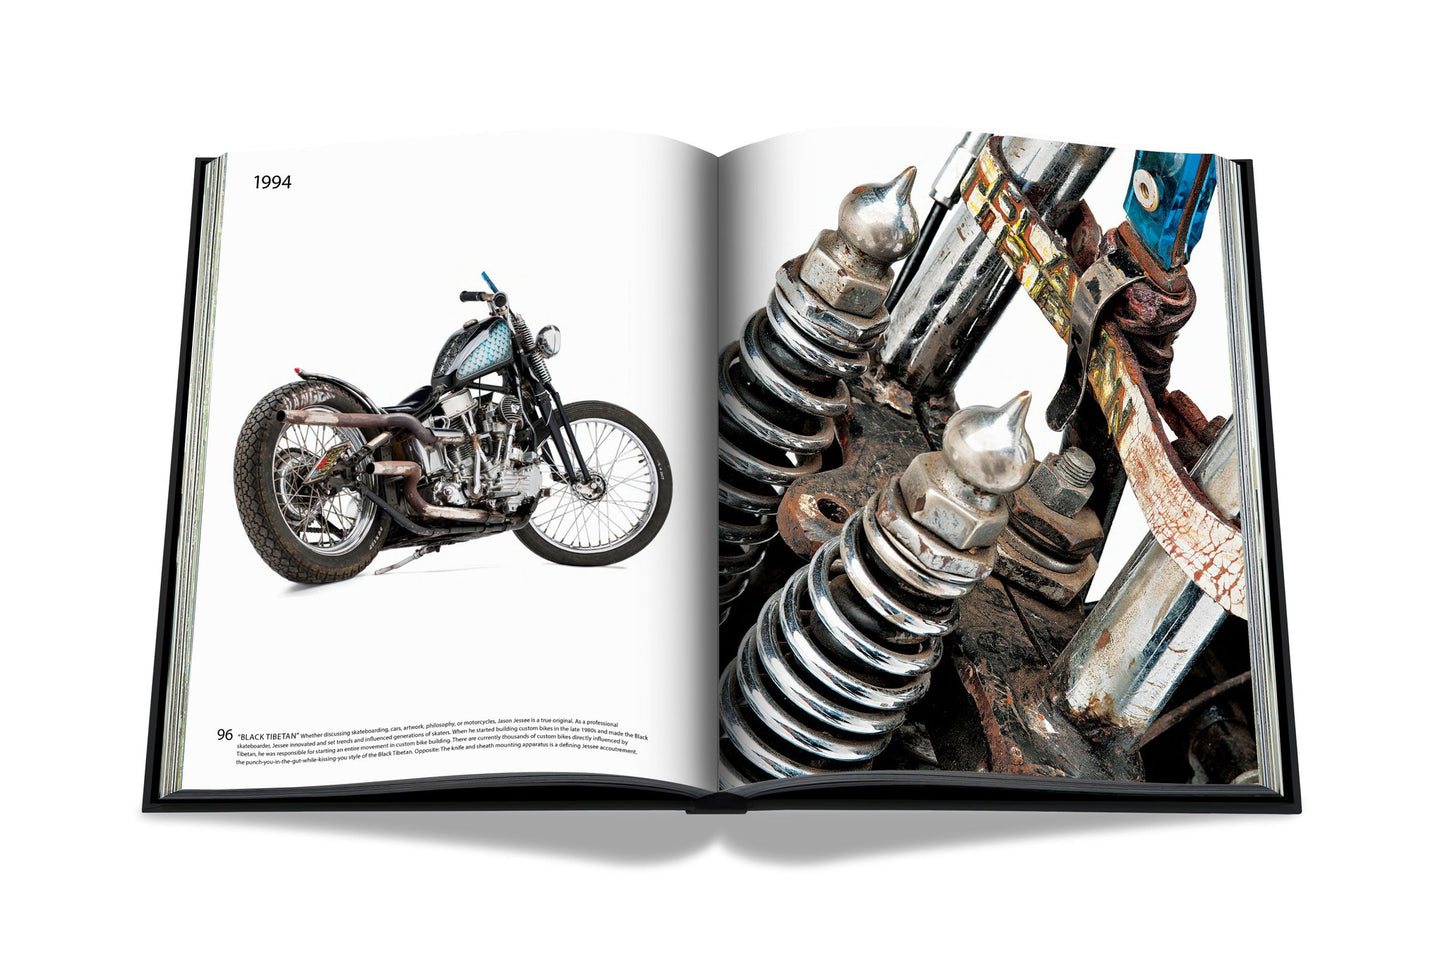 Livre Motorcycles: Impossible collection